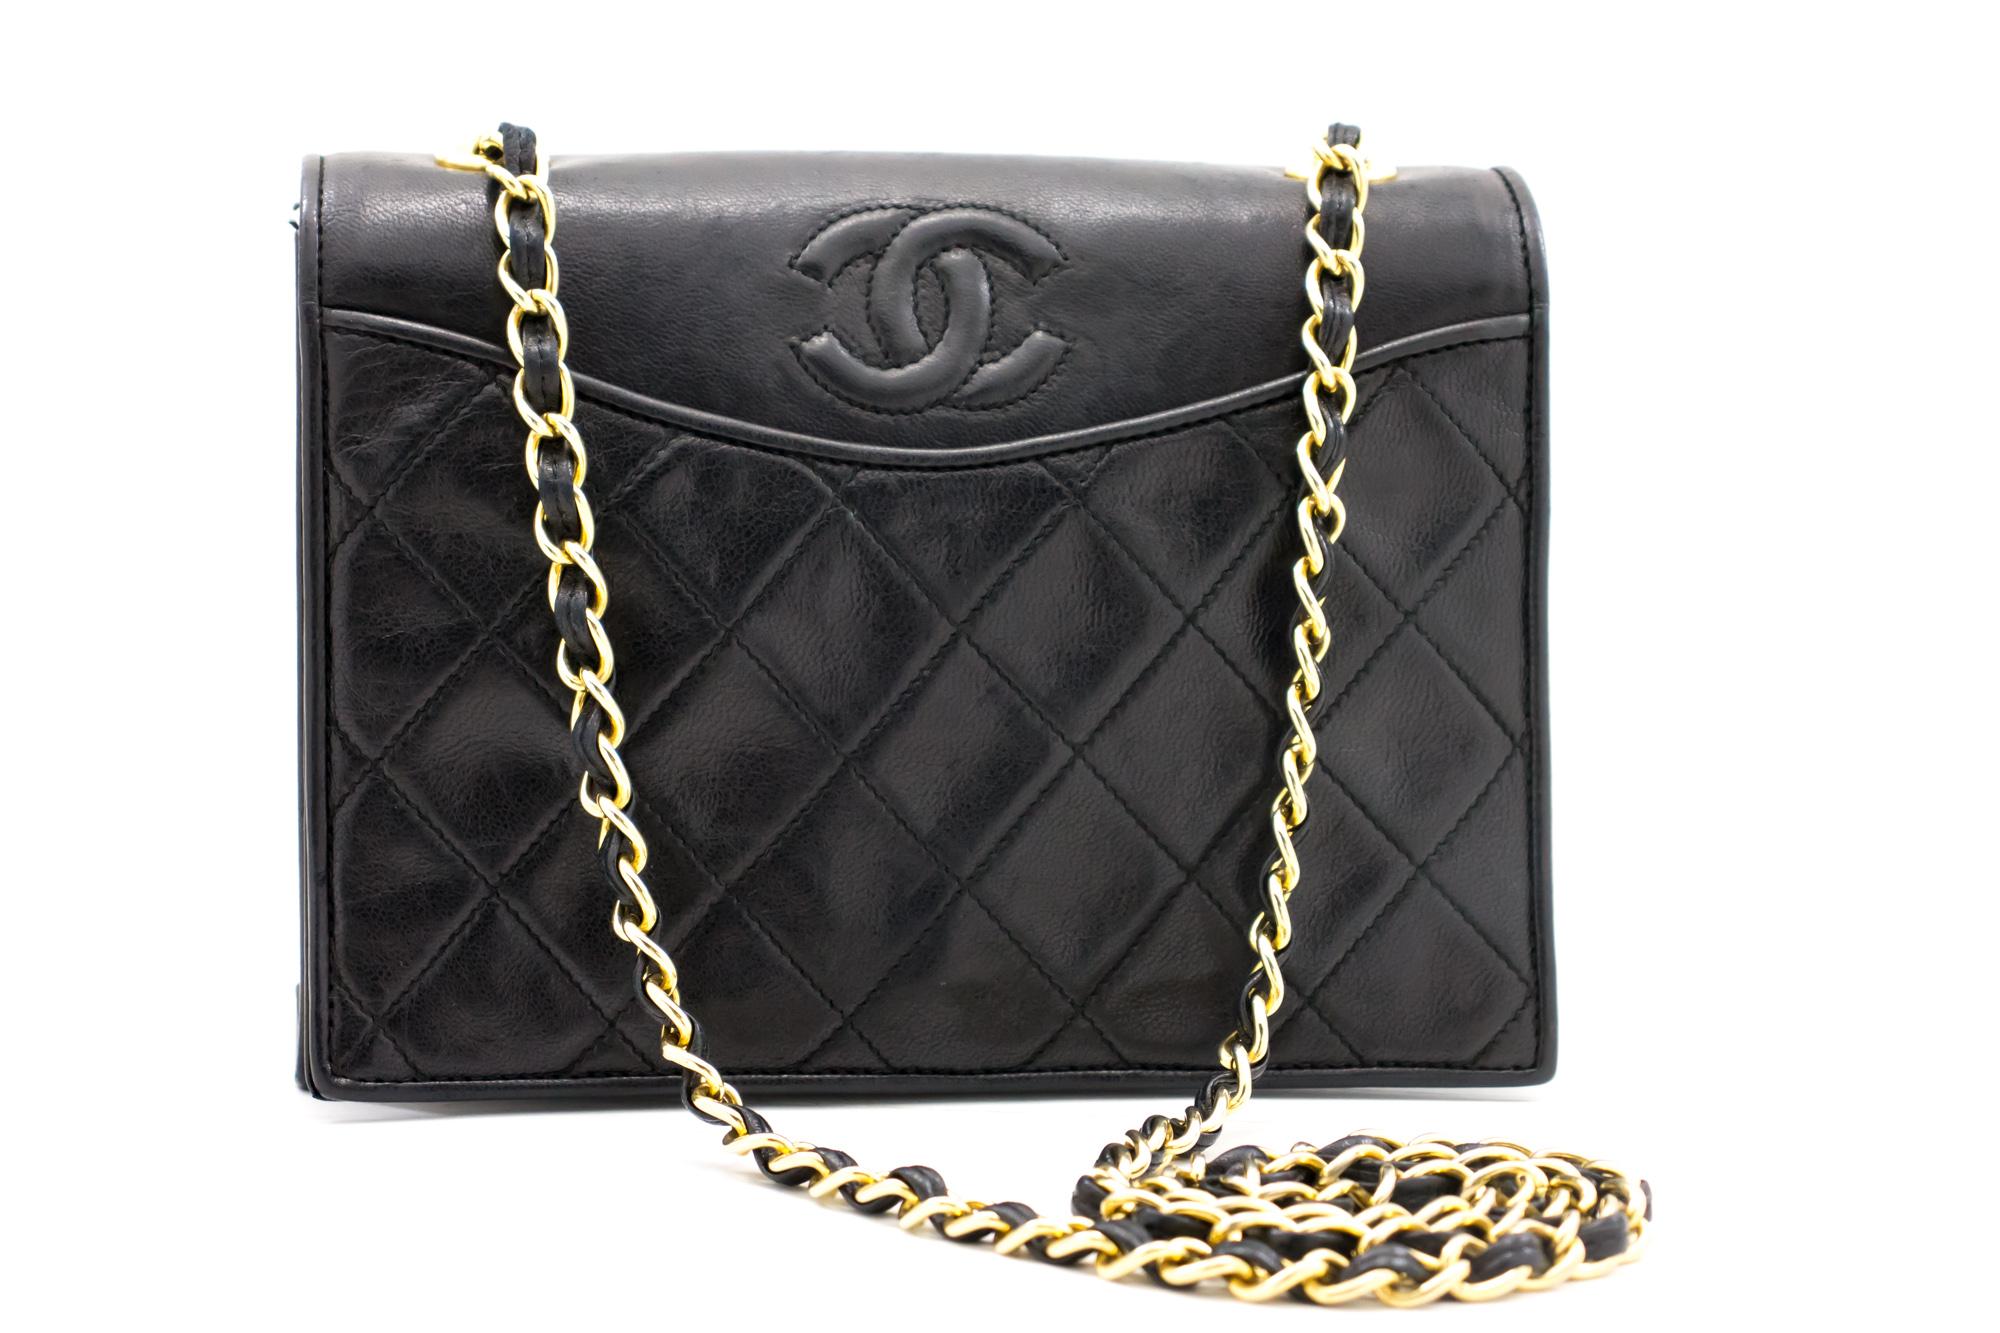 An authentic CHANEL Full Flap Classic Chain Shoulder Bag Black Quilted made of black Lambskin. The color is Black. The outside material is Leather. The pattern is Solid. This item is Vintage / Classic. The year of manufacture would be